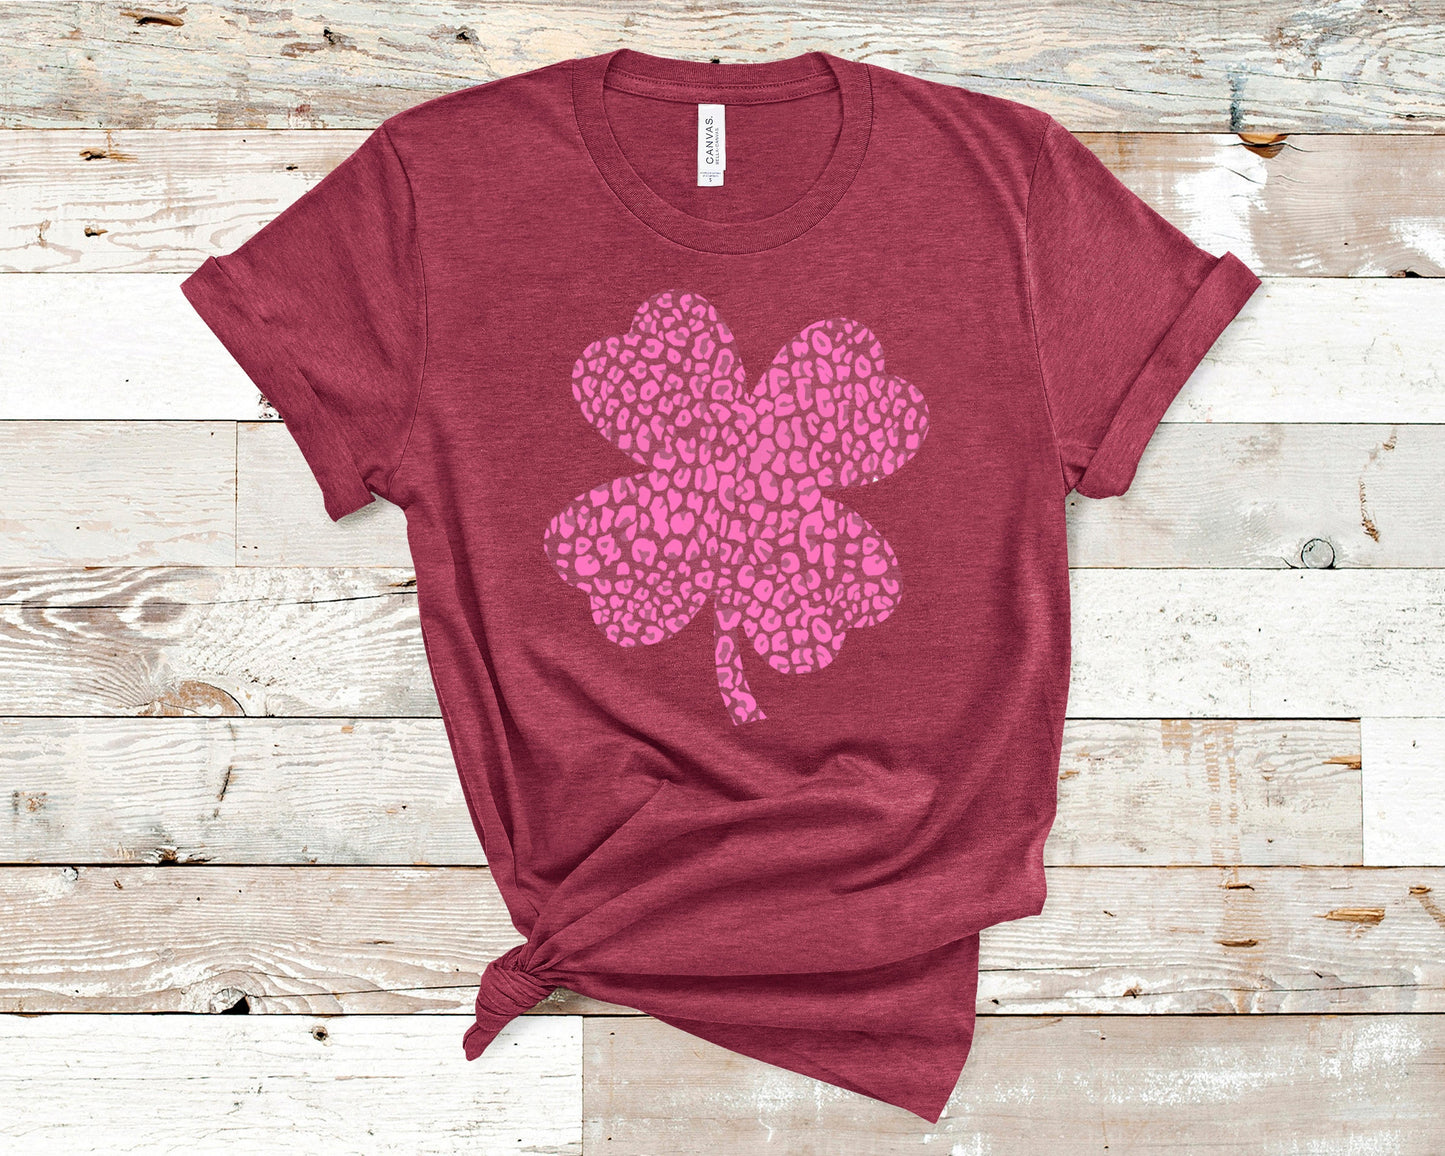 Leopard Shamrock Clover St. Patrick's Day Tee - YOUTH